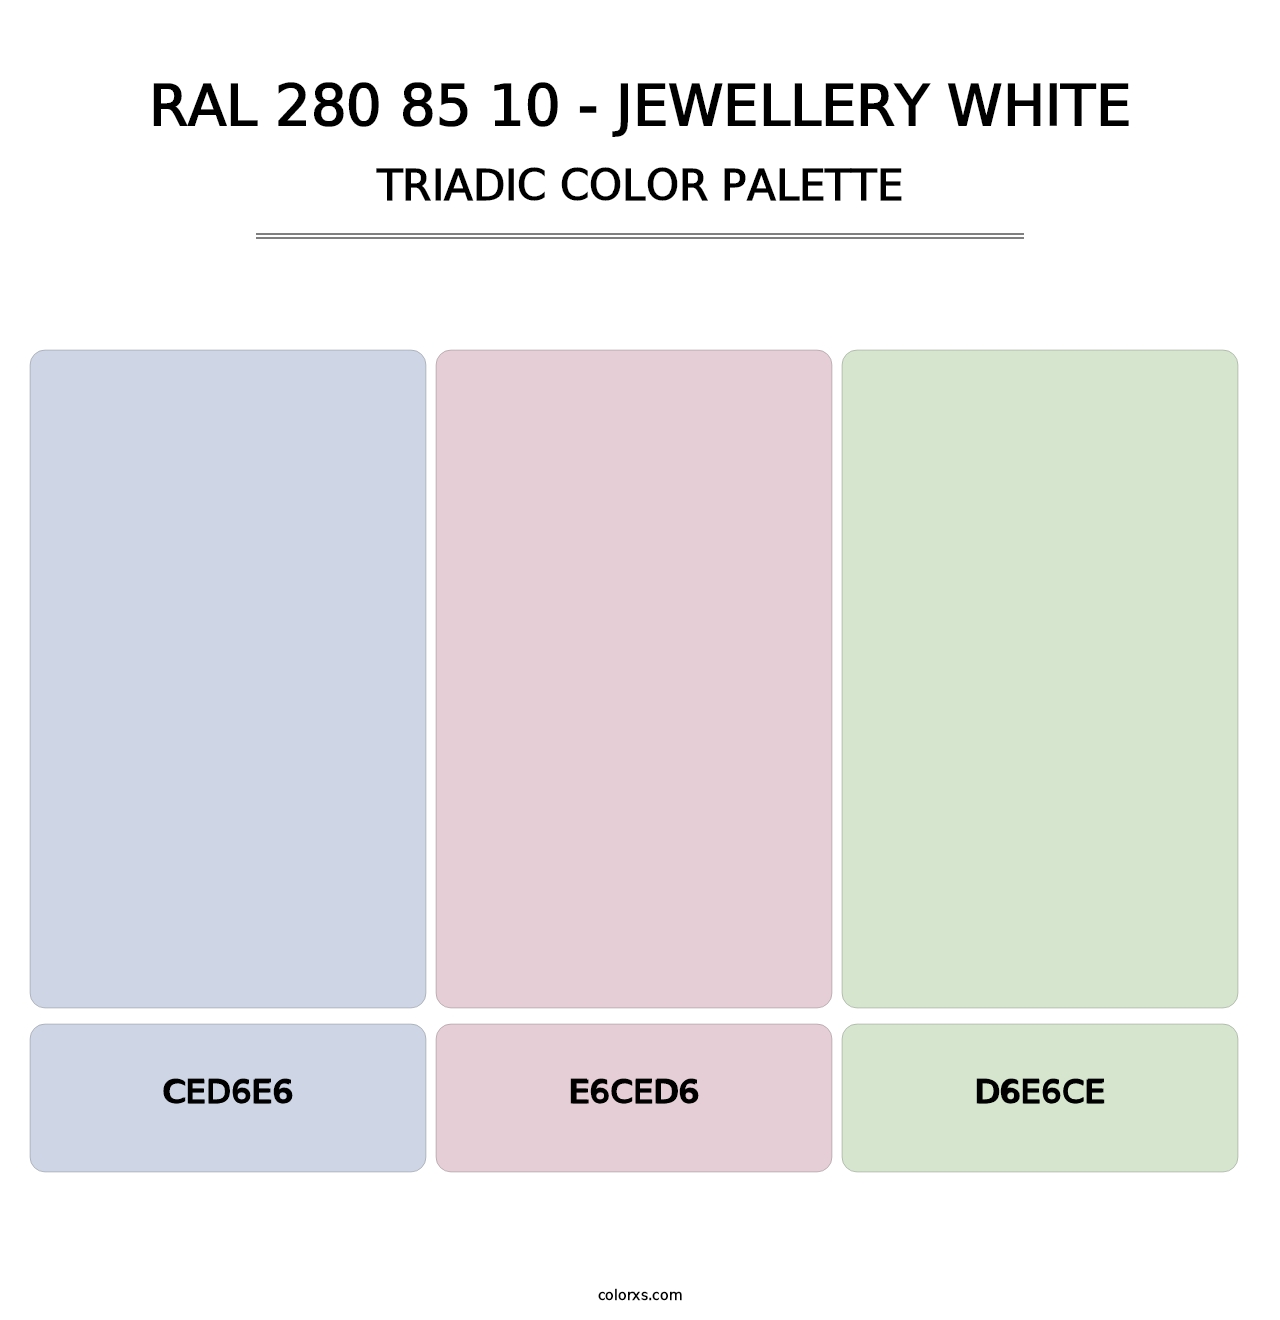 RAL 280 85 10 - Jewellery White - Triadic Color Palette